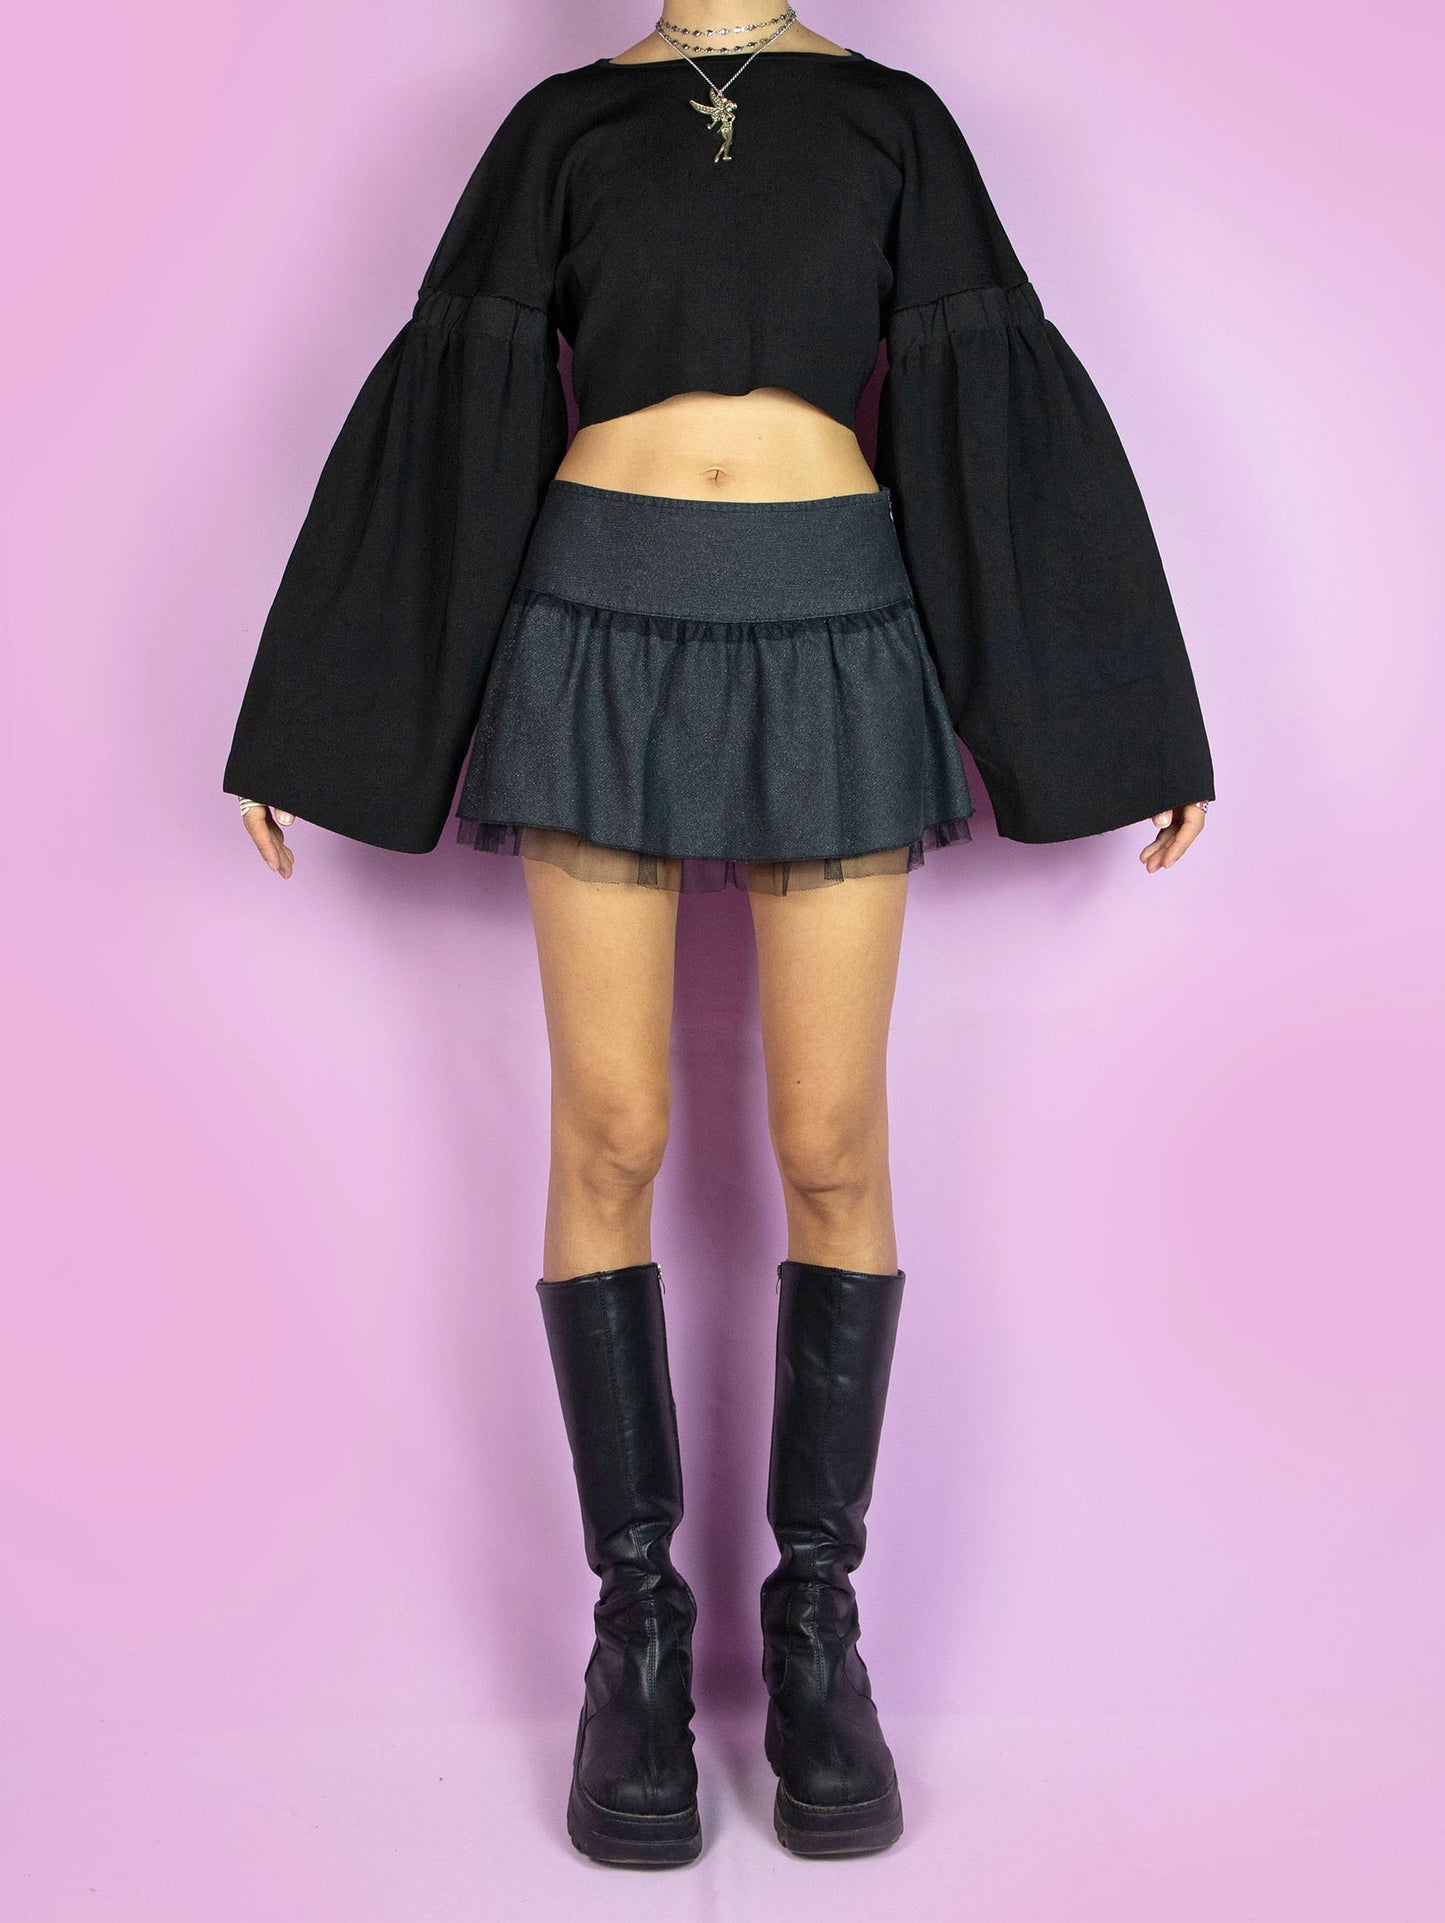 The Y2K Black Wide Sleeve Sweater is a vintage cropped black top with extra-wide long sleeves. Cyber goth 2000s subversive top.